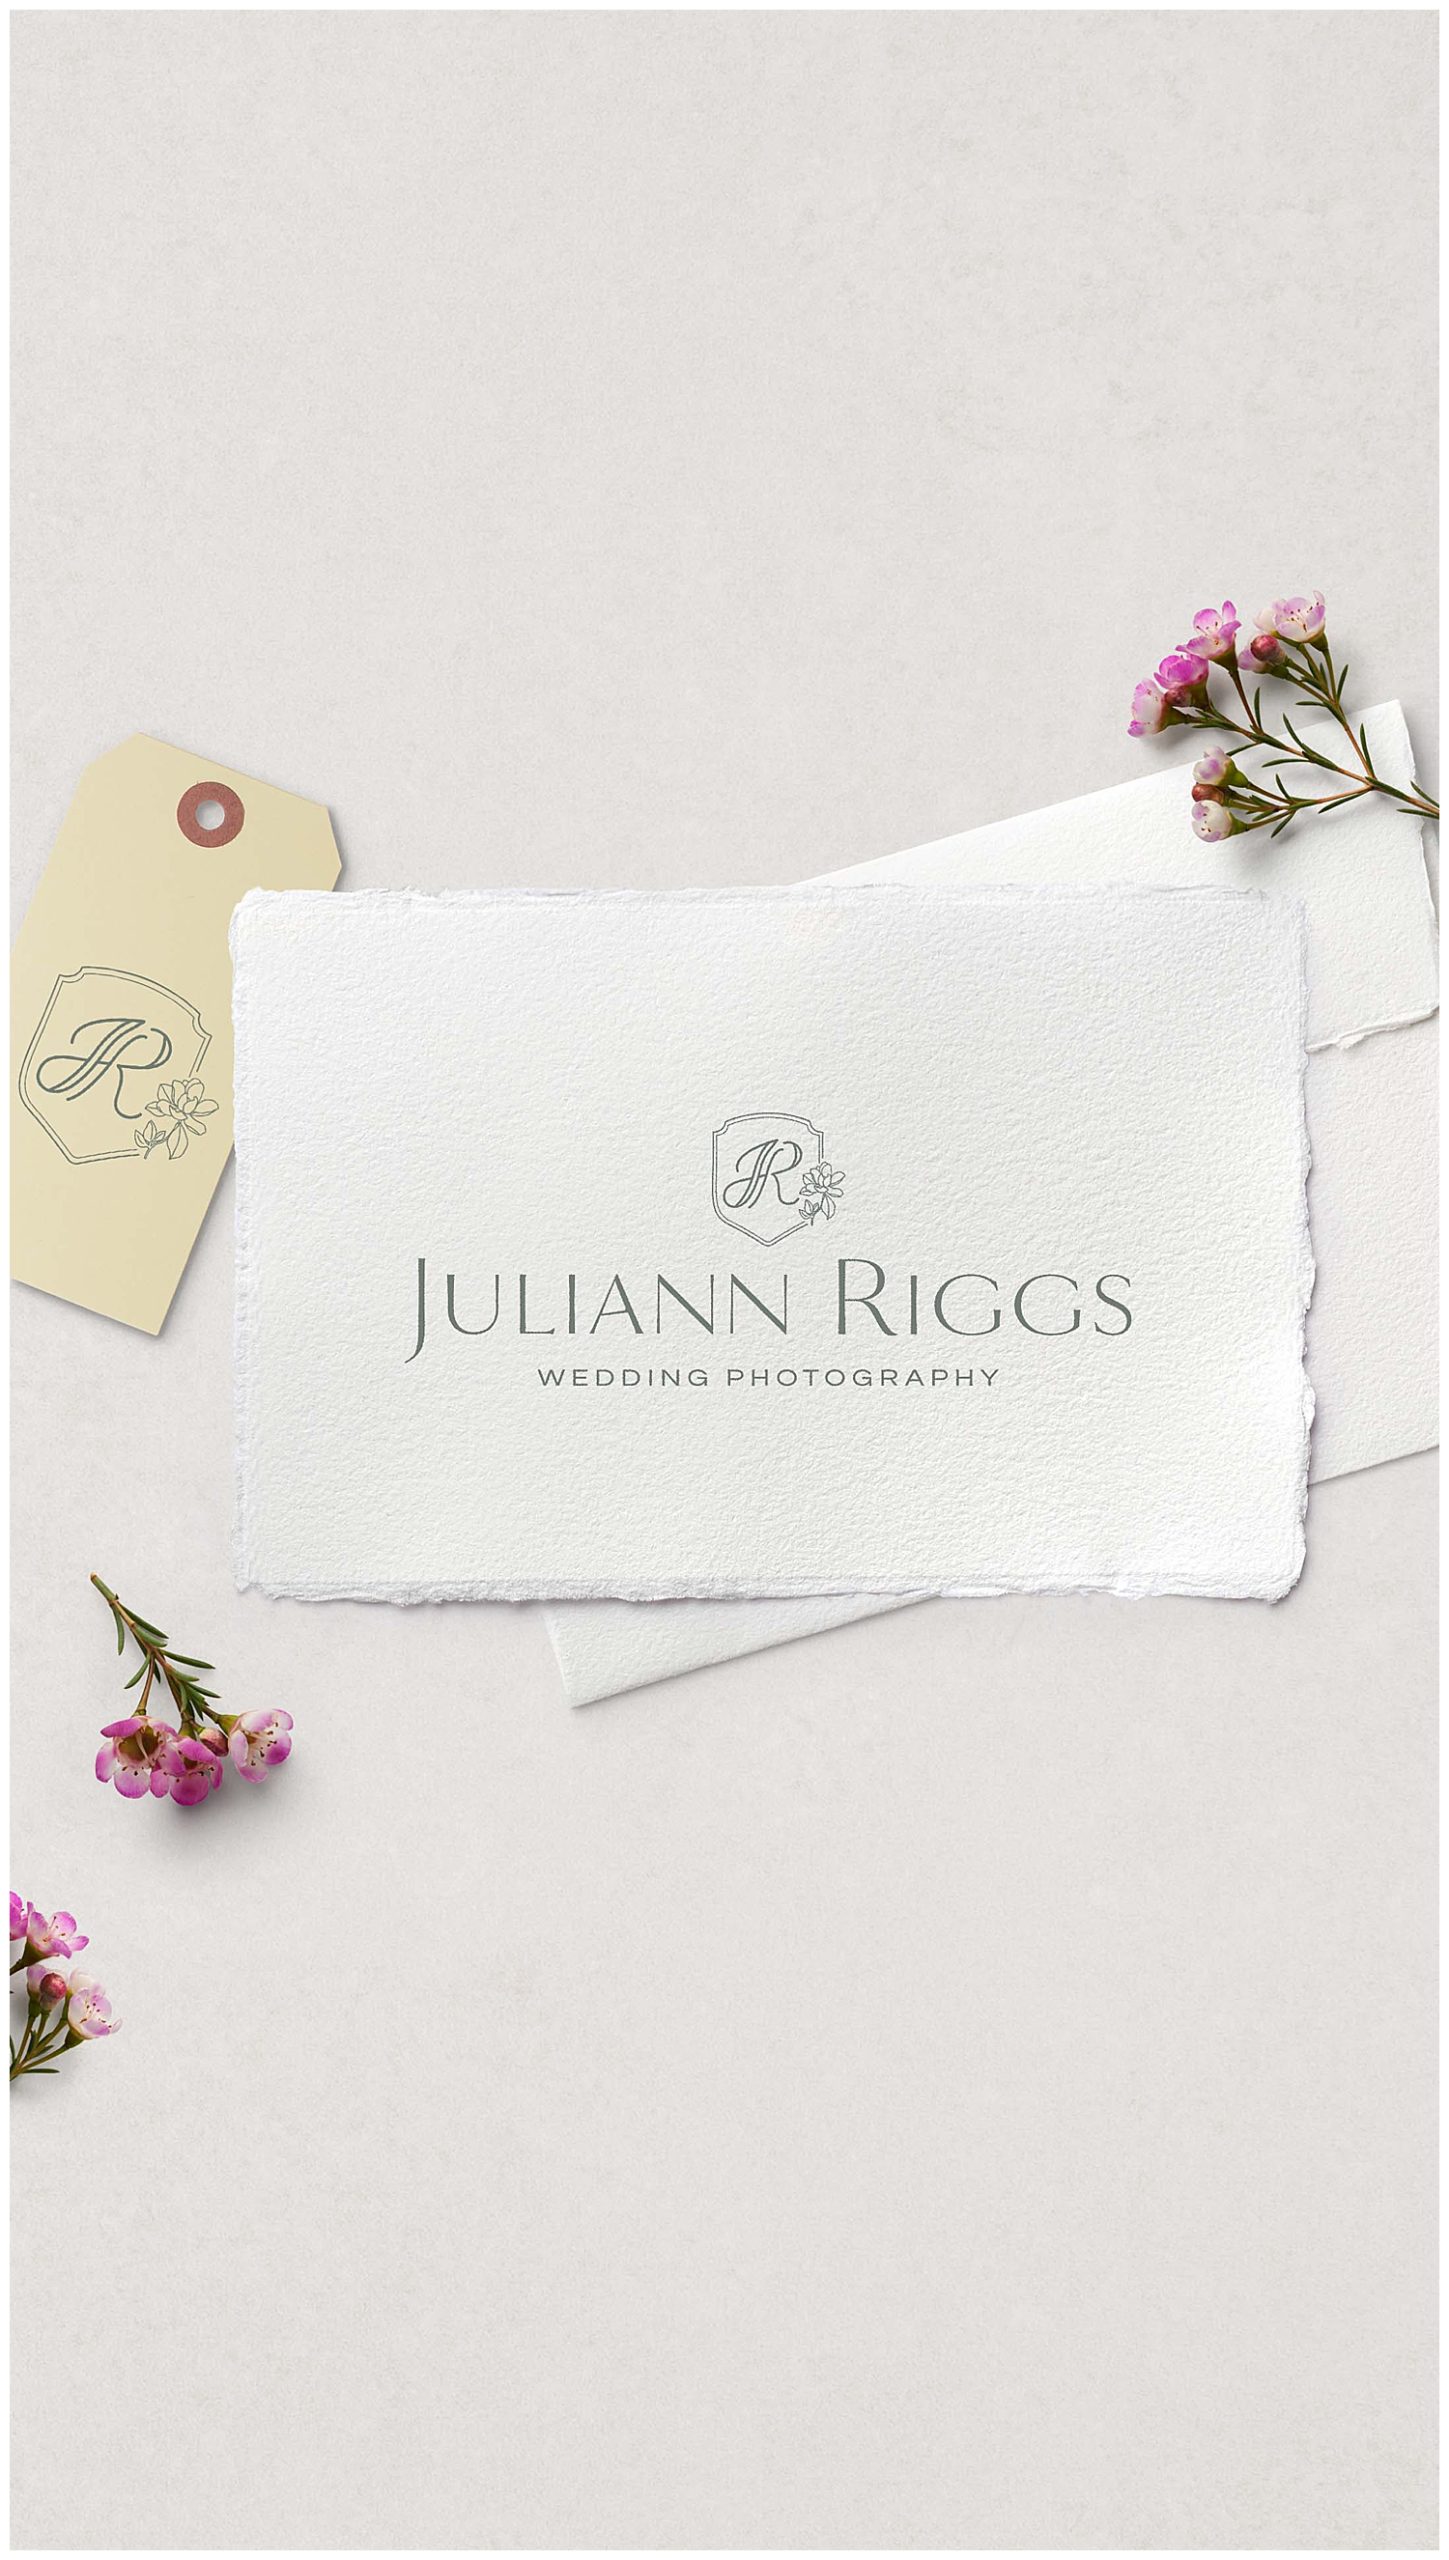 Flowers surround Juliann Riggs Photography's stationery.